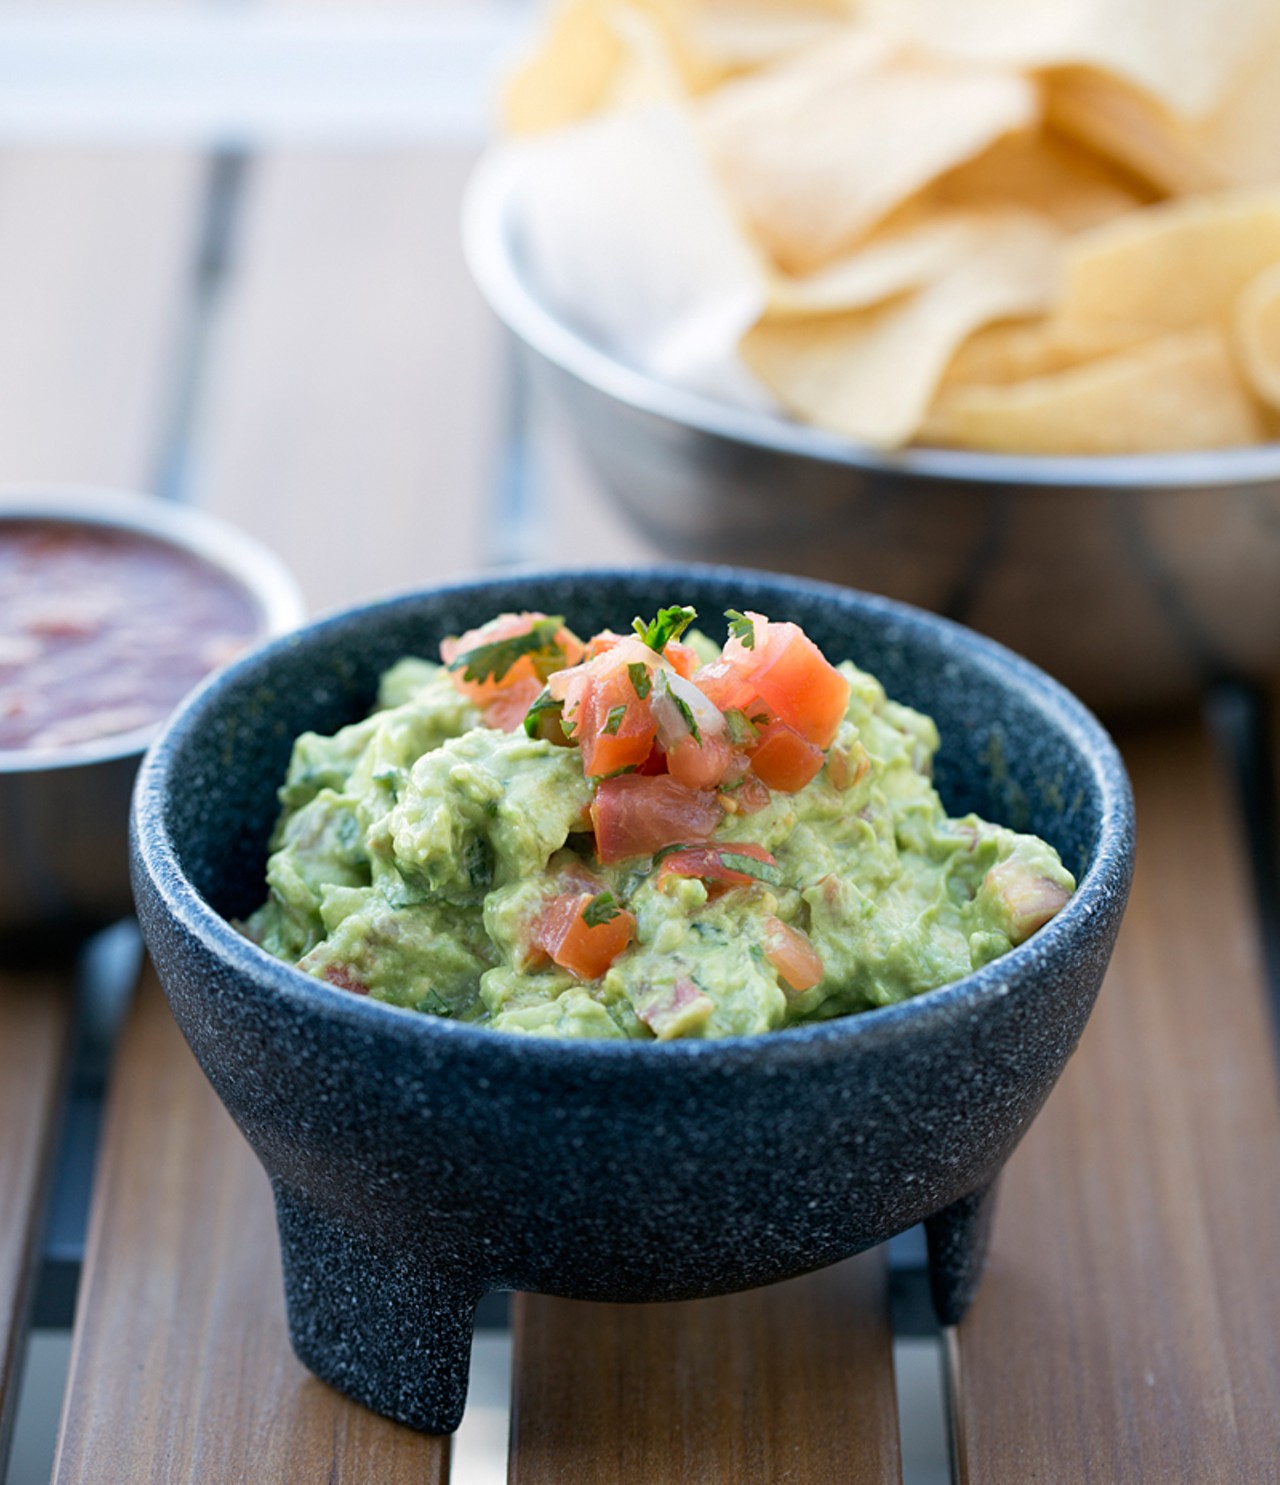 Vida's handcrafted guac with chips and salsa.